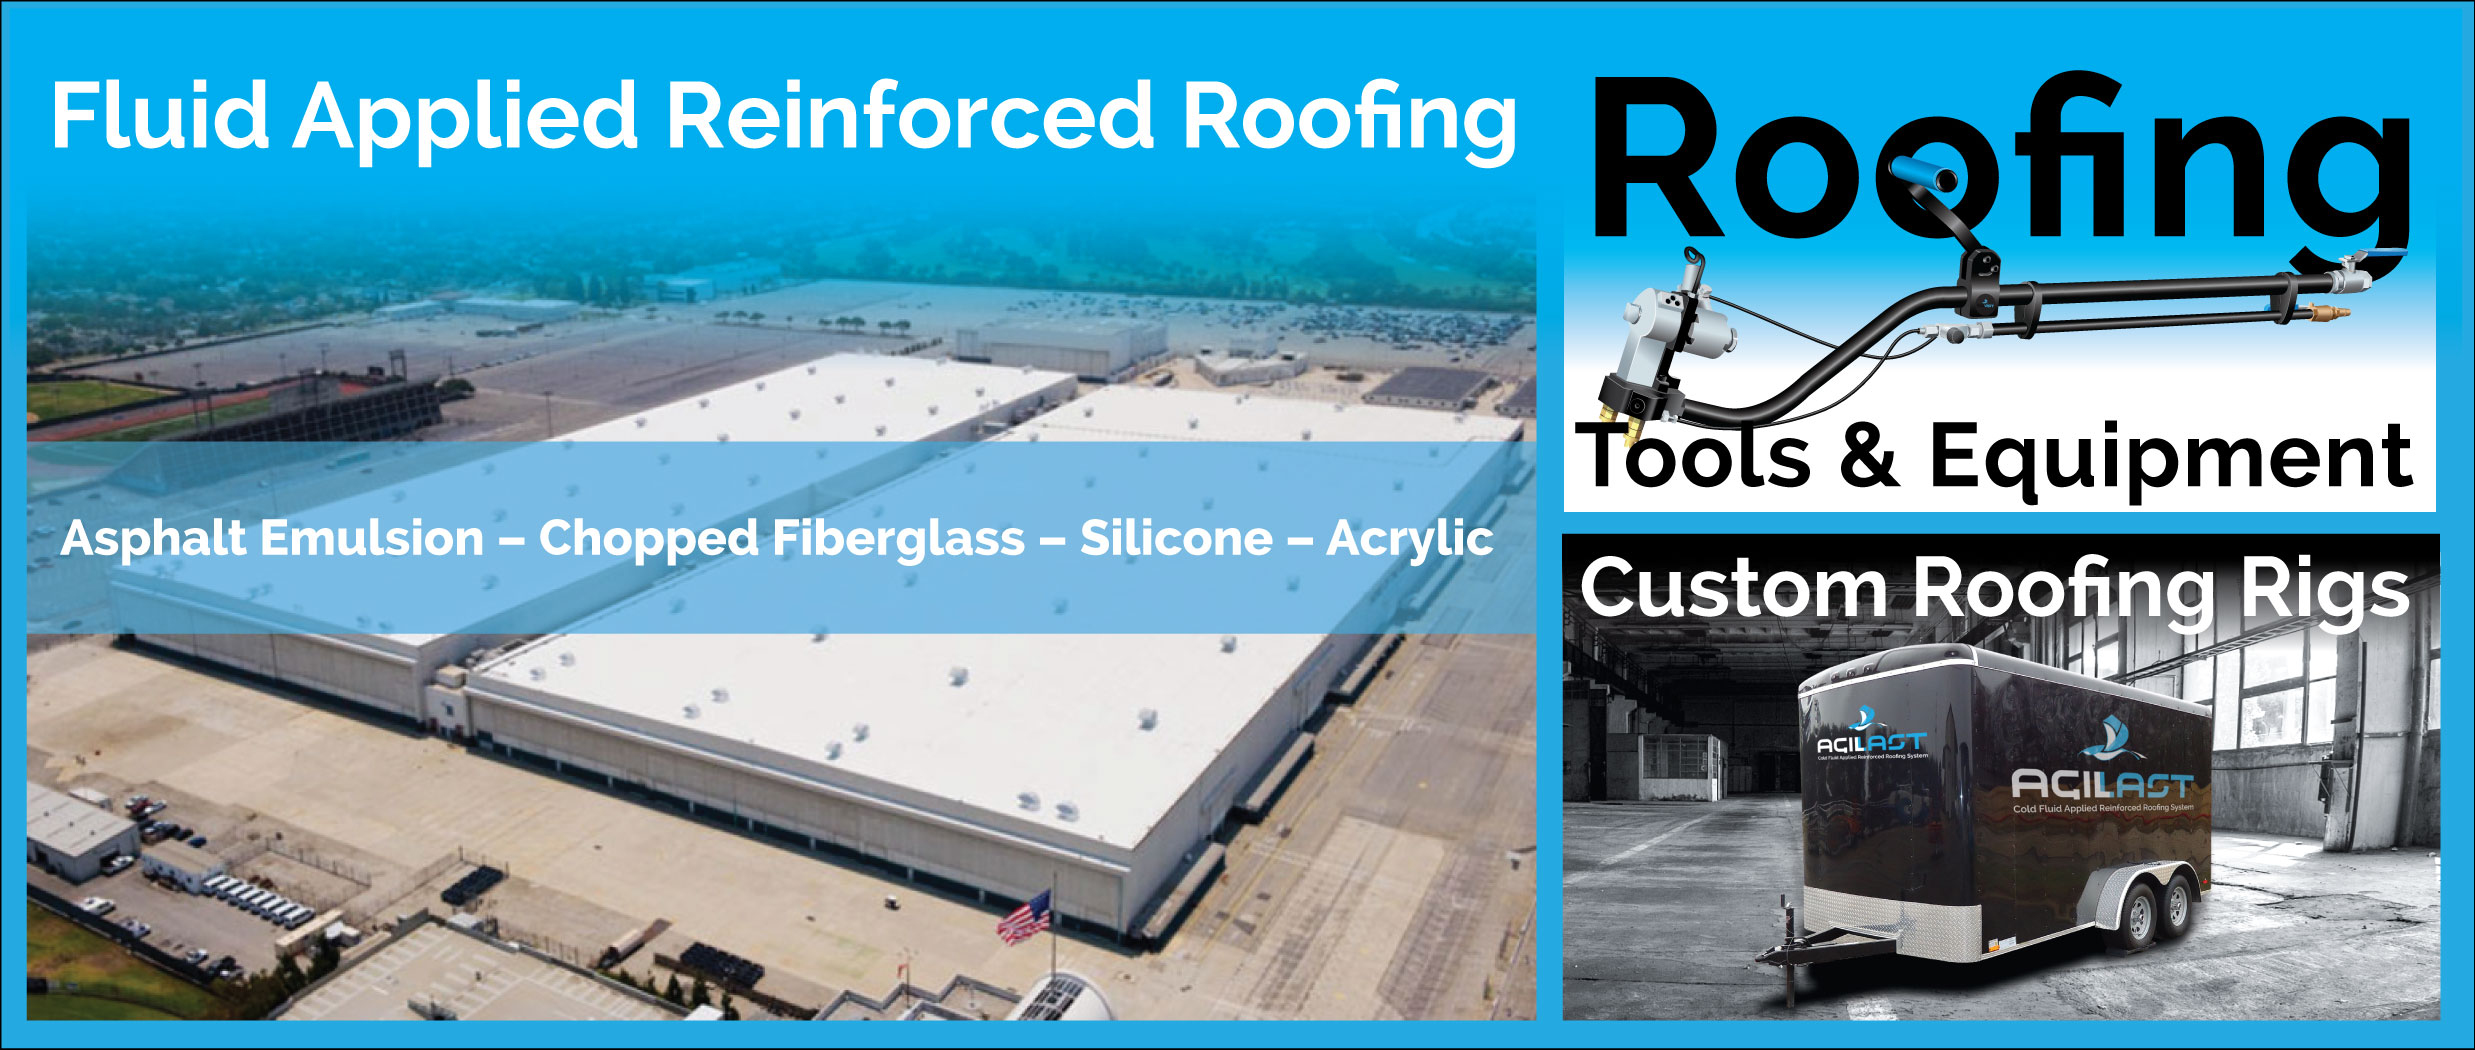 FARR Roofing